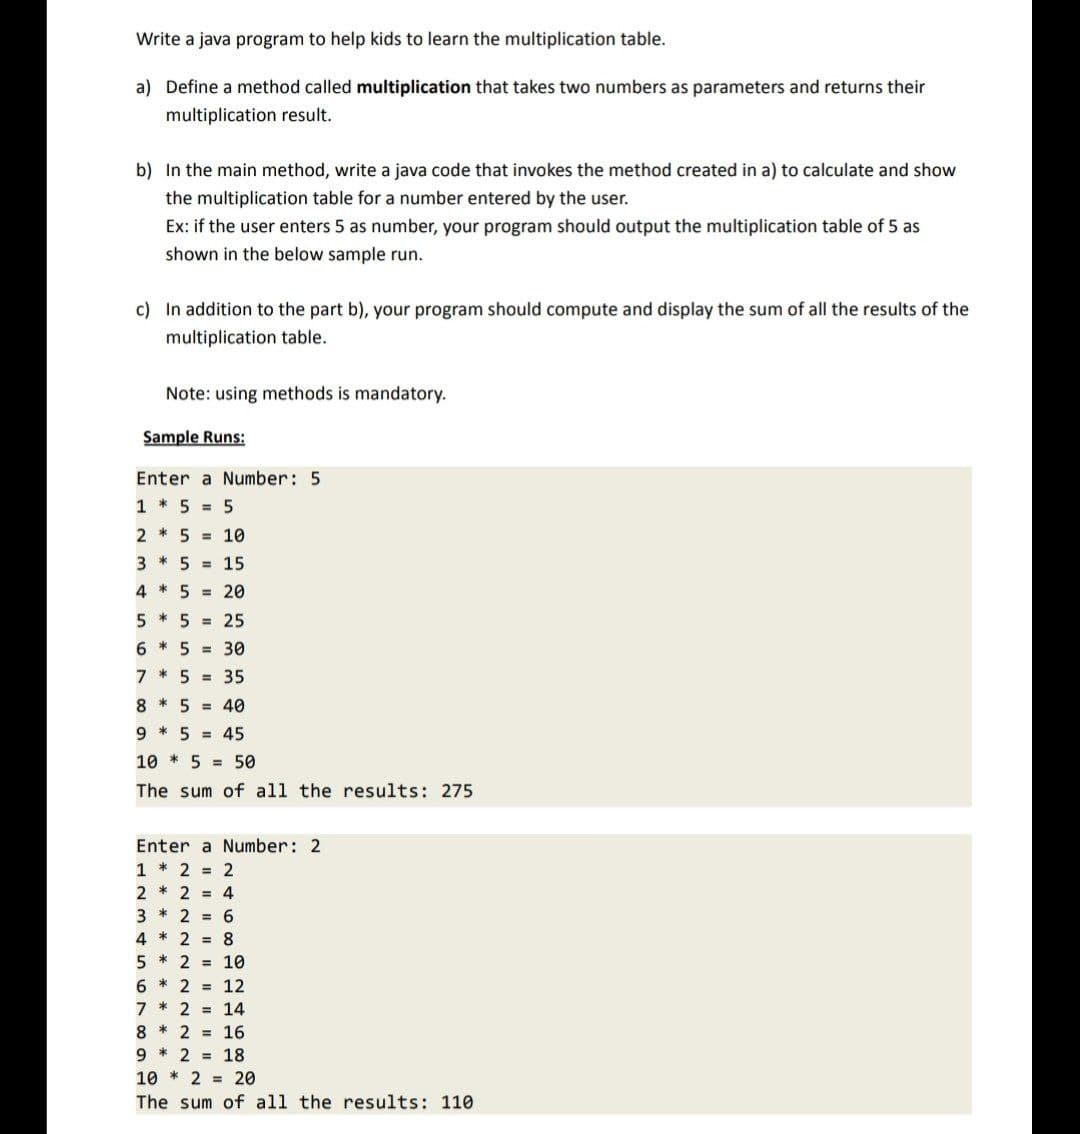 Write a java program to help kids to learn the multiplication table.
a) Define a method called multiplication that takes two numbers as parameters and returns their
multiplication result.
b) In the main method, write a java code that invokes the method created in a) to calculate and show
the multiplication table for a number entered by the user.
Ex: if the user enters 5 as number, your program should output the multiplication table of 5 as
shown in the below sample run.
c) In addition to the part b), your program should compute and display the sum of all the results of the
multiplication table.
Note: using methods is mandatory.
Sample Runs:
Enter a Number: 5
1 * 5 = 5
2 * 5 = 10
3* 5 = 15
4 * 5 = 20
5 * 5 =
25
6 * 5 = 30
7 * 5 = 35
8 * 5 = 40
95 45
10 5 50
The sum of all the results: 275
Enter a Number: 2
1 * 2 = 2
2 * 2 = 4
3 * 2 = 6
4*2 = 8
5 * 2 = 10
6 2 = 12
7*2 = 14
82 = 16
9 * 2 = 18
102
20
The sum of all the results: 110